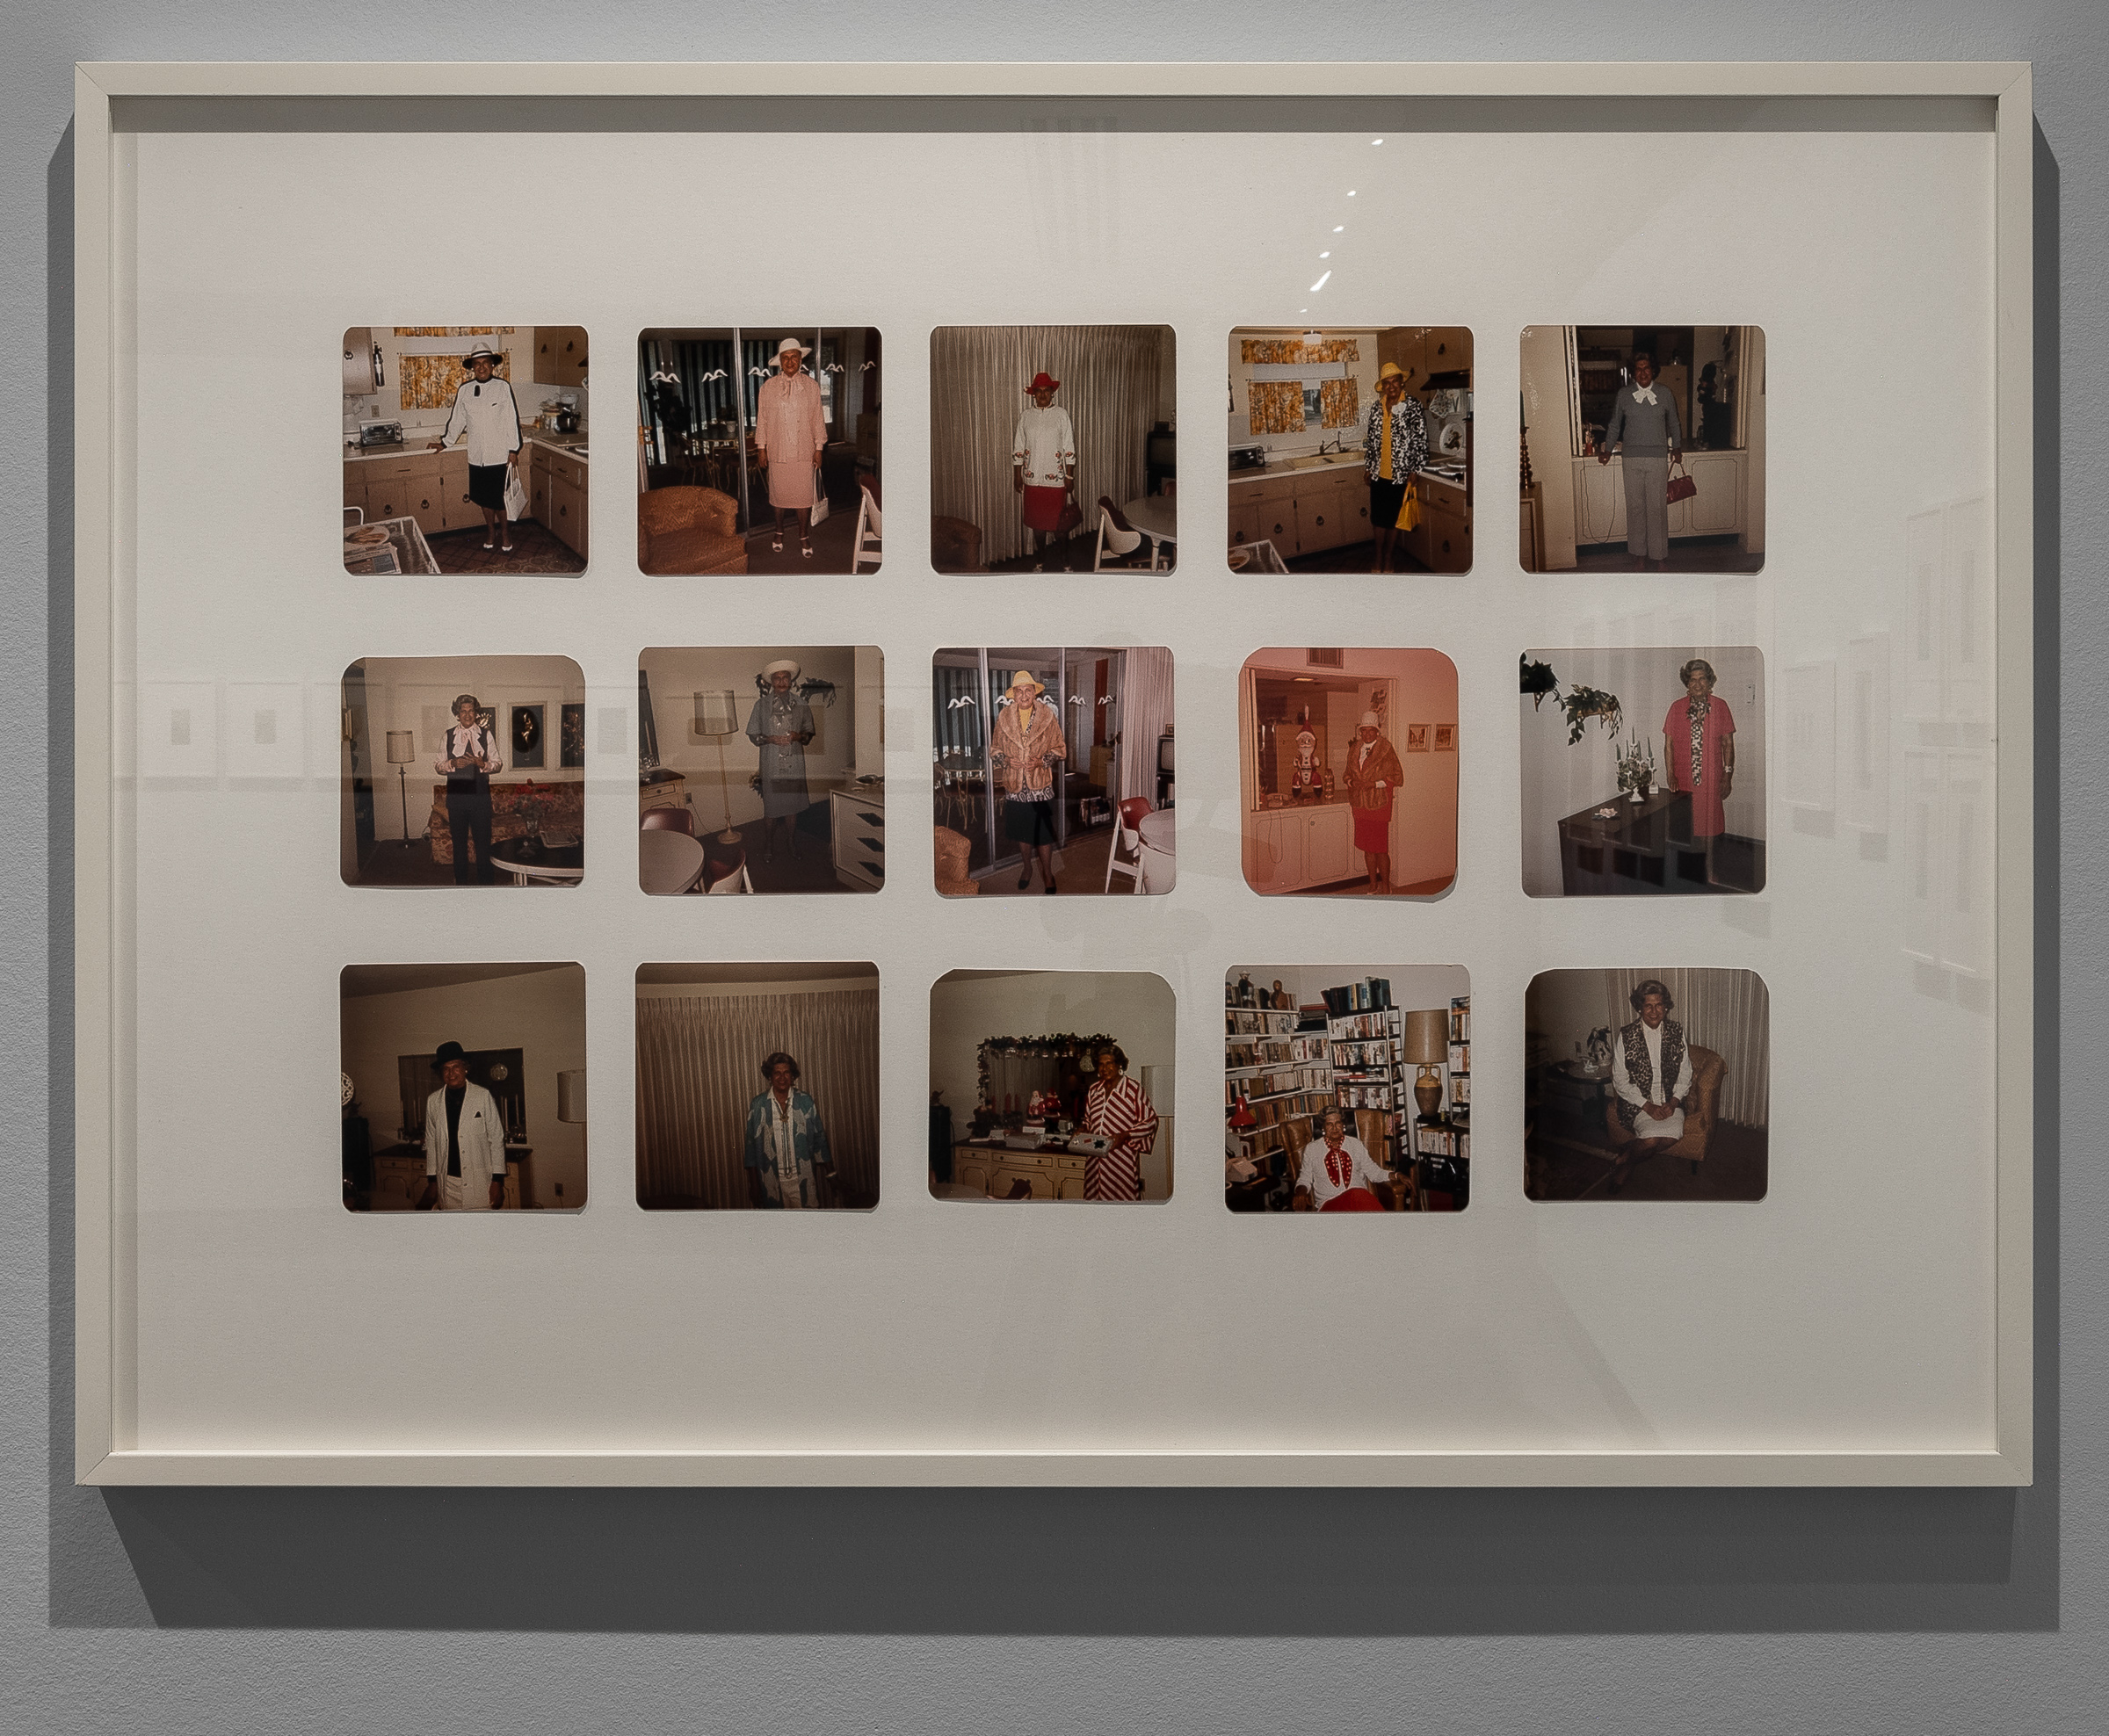     Various photographers, Mauvais Genre/Under Cover: A Secret History of Cross-Dressers, installation view, Ryerson Image Centre Gallery, 2022. Courtesy of Sébastien Lifshitz and the RIC

